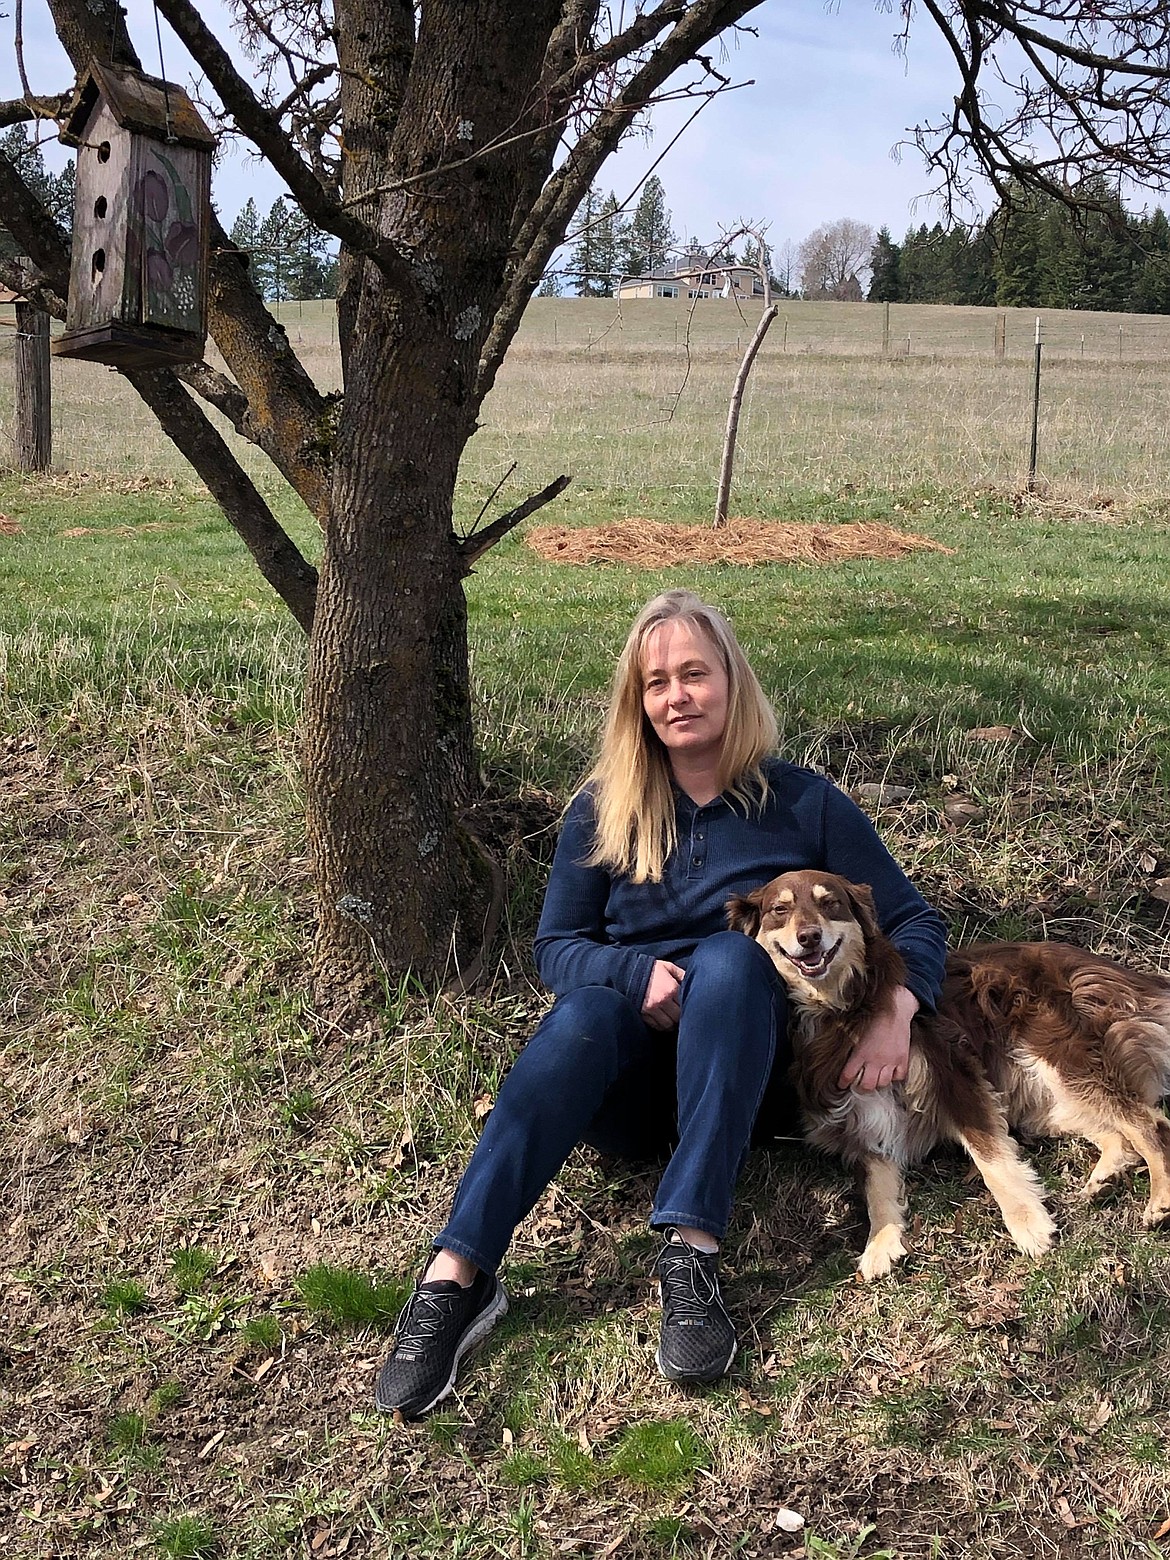 Opal Harbert and Buck relax on the family’s property in Mead, Wash. (Photo by SHELLEY RUSS)